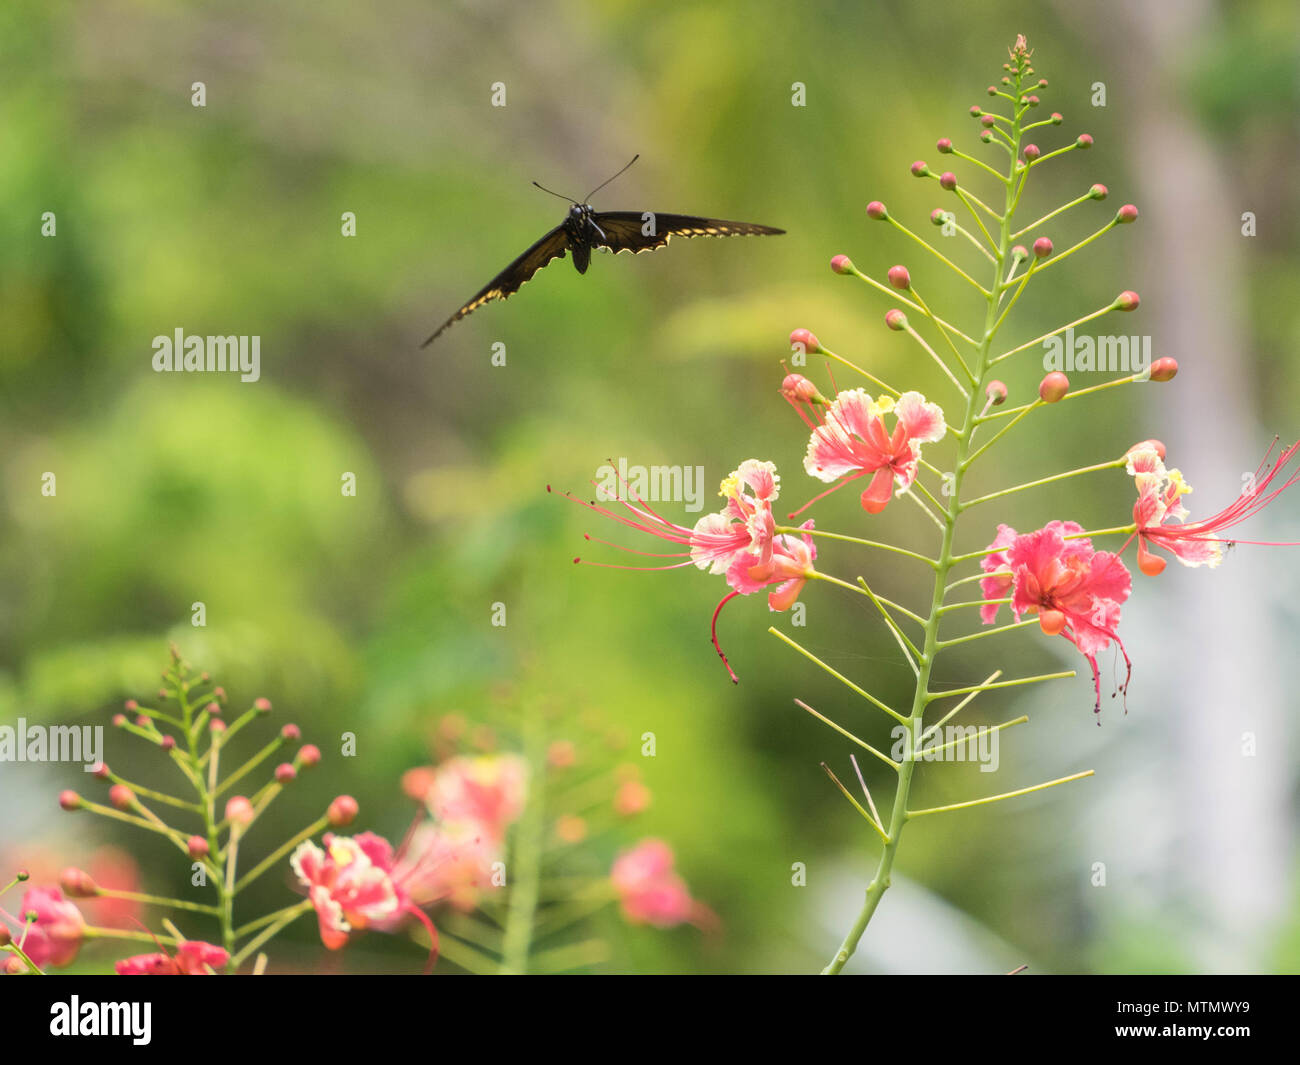 Polydamas swallowtail coming in to land on flowers in the Peninsula Papgayo region of Guanacaste, Costa Rica Stock Photo